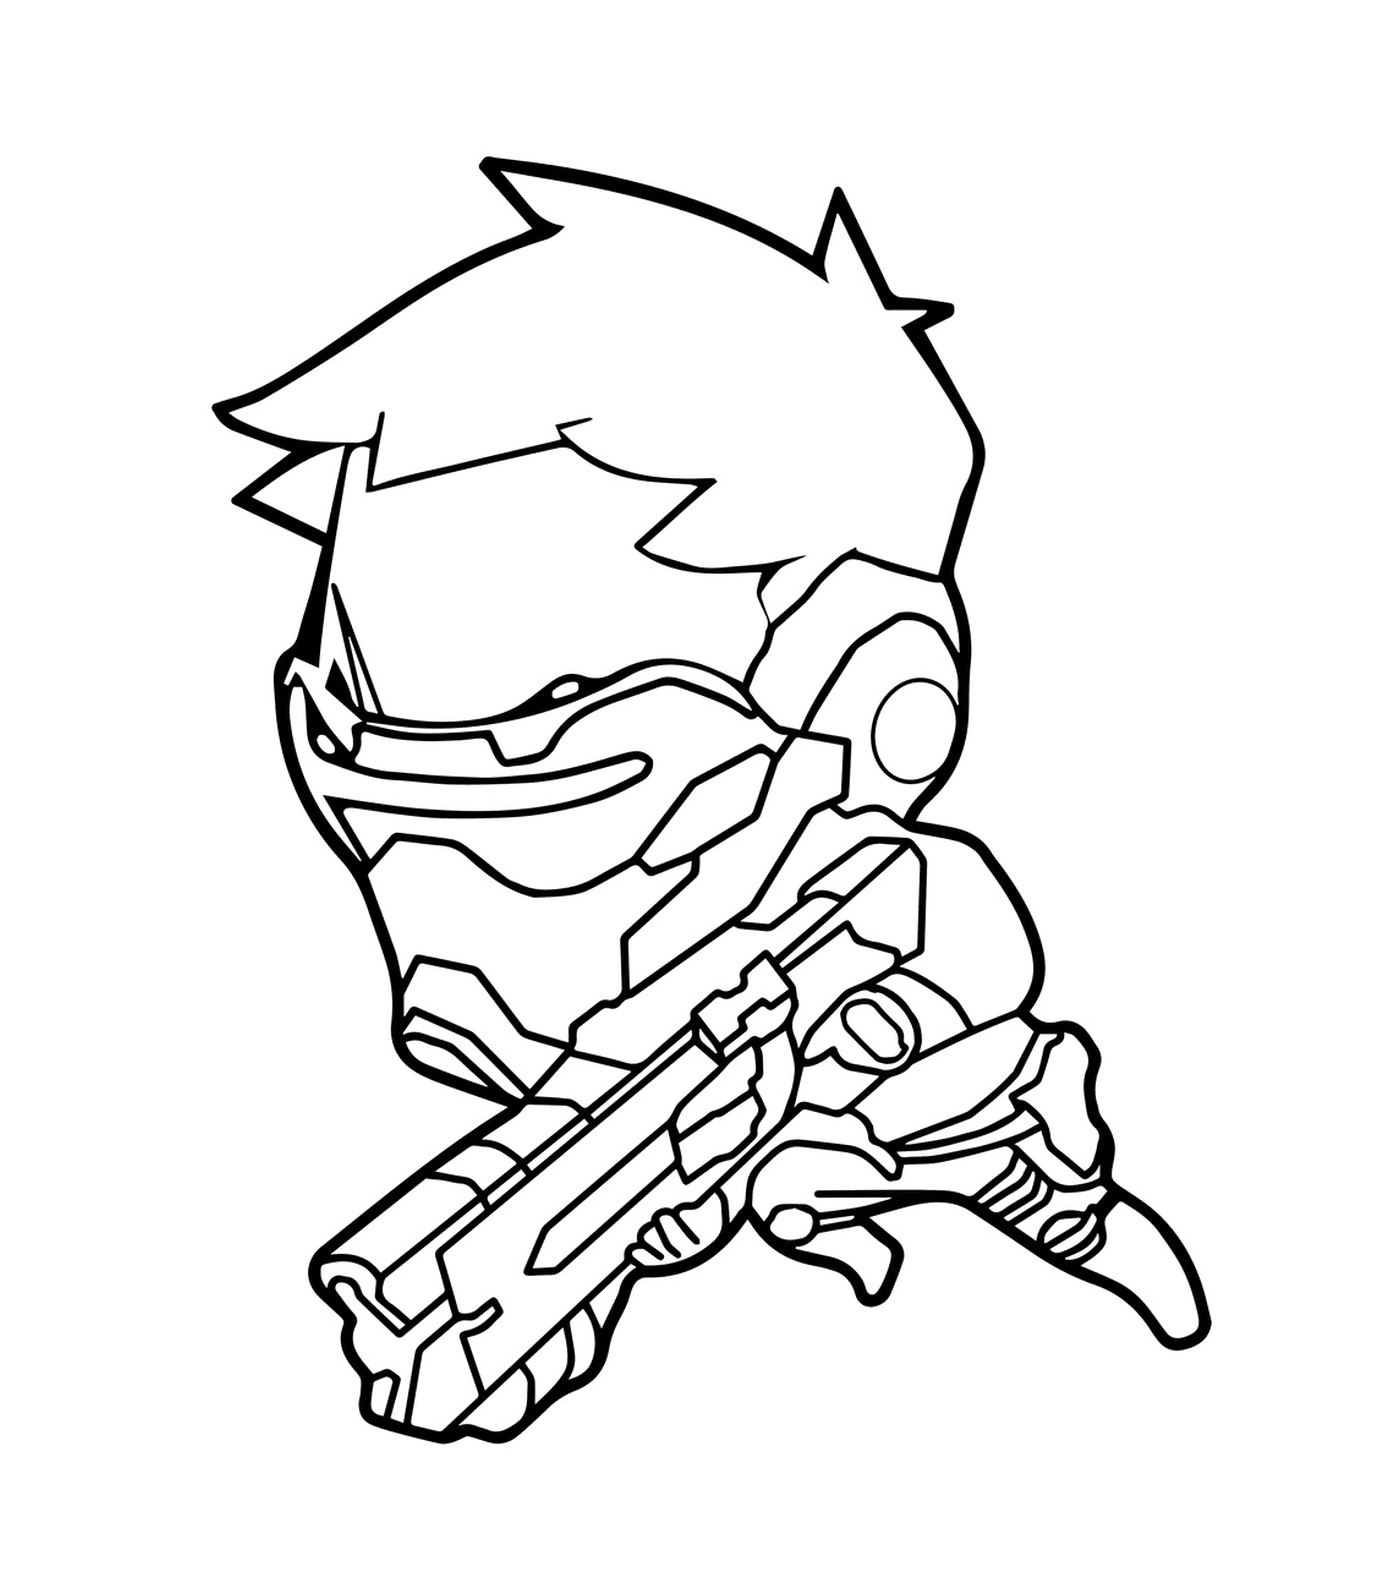  Soldier 76 with a rifle 